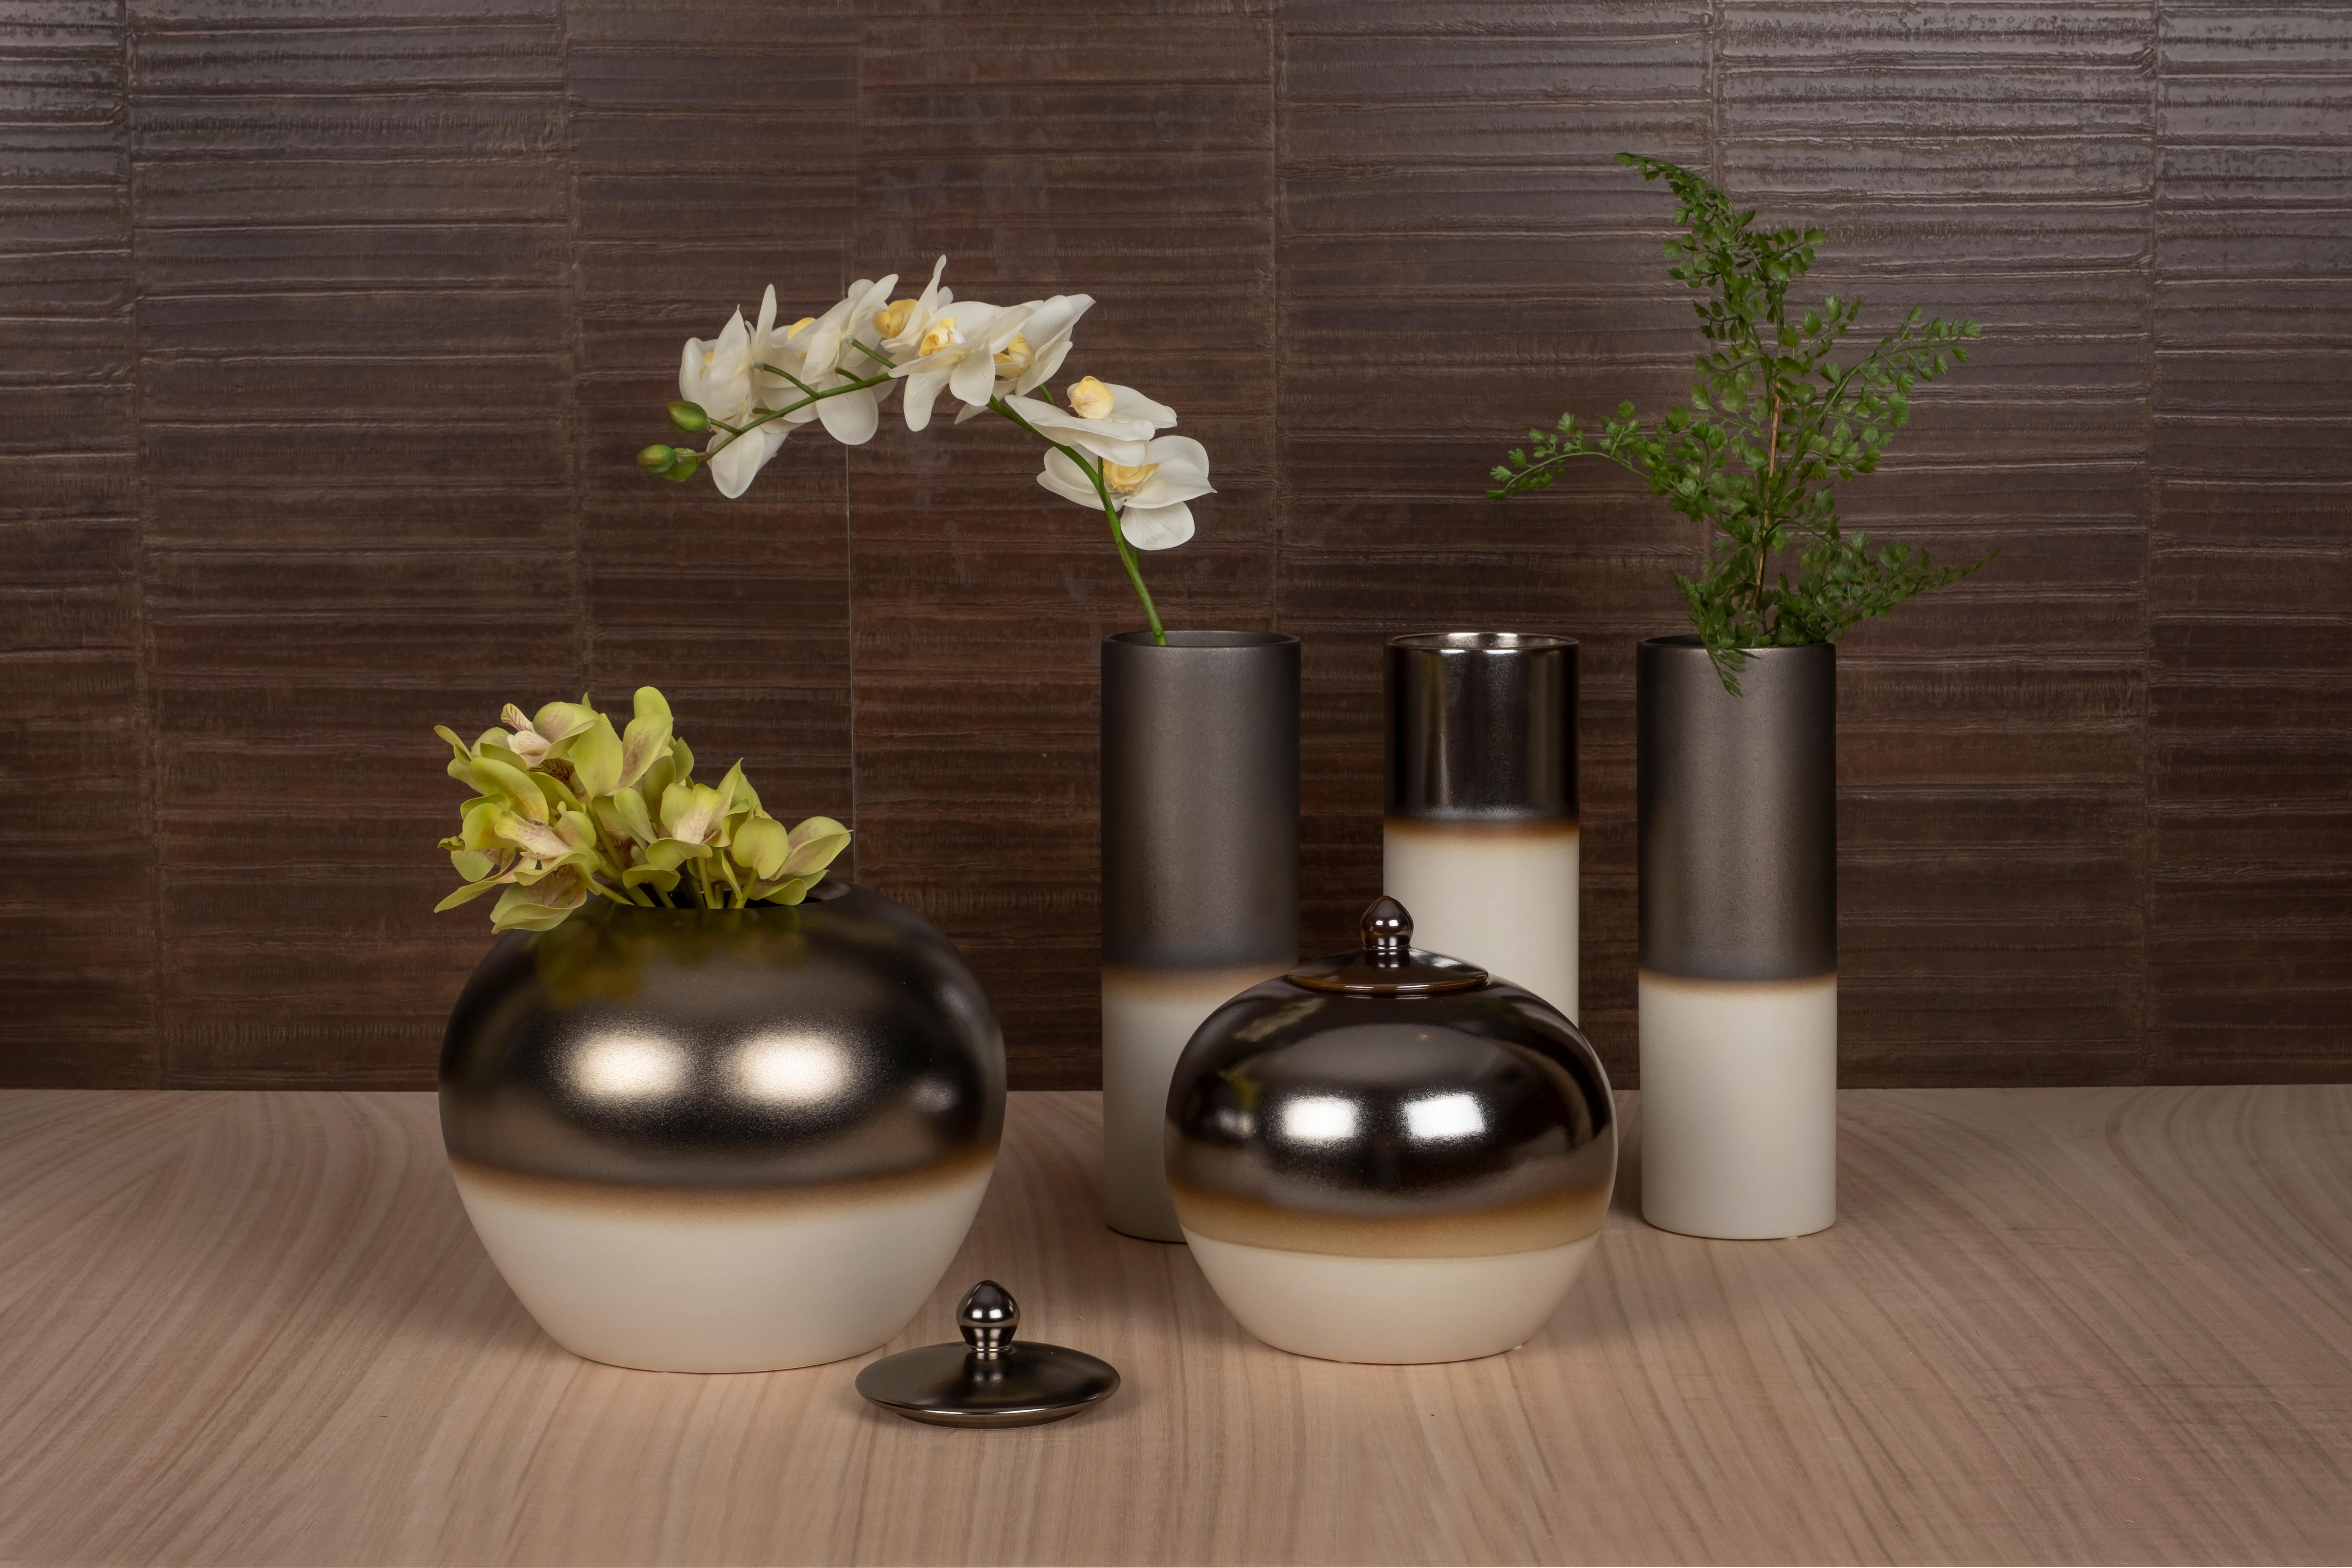 Set/5 Ceramic Vases and Pots, Cream & Bronze, Lusitanus Home Collection, Handcrafted in Portugal - Europe by Lusitanus Home.

This beautiful set includes three waterproof ceramic vases and two pots with lids, perfect to be displayed together in